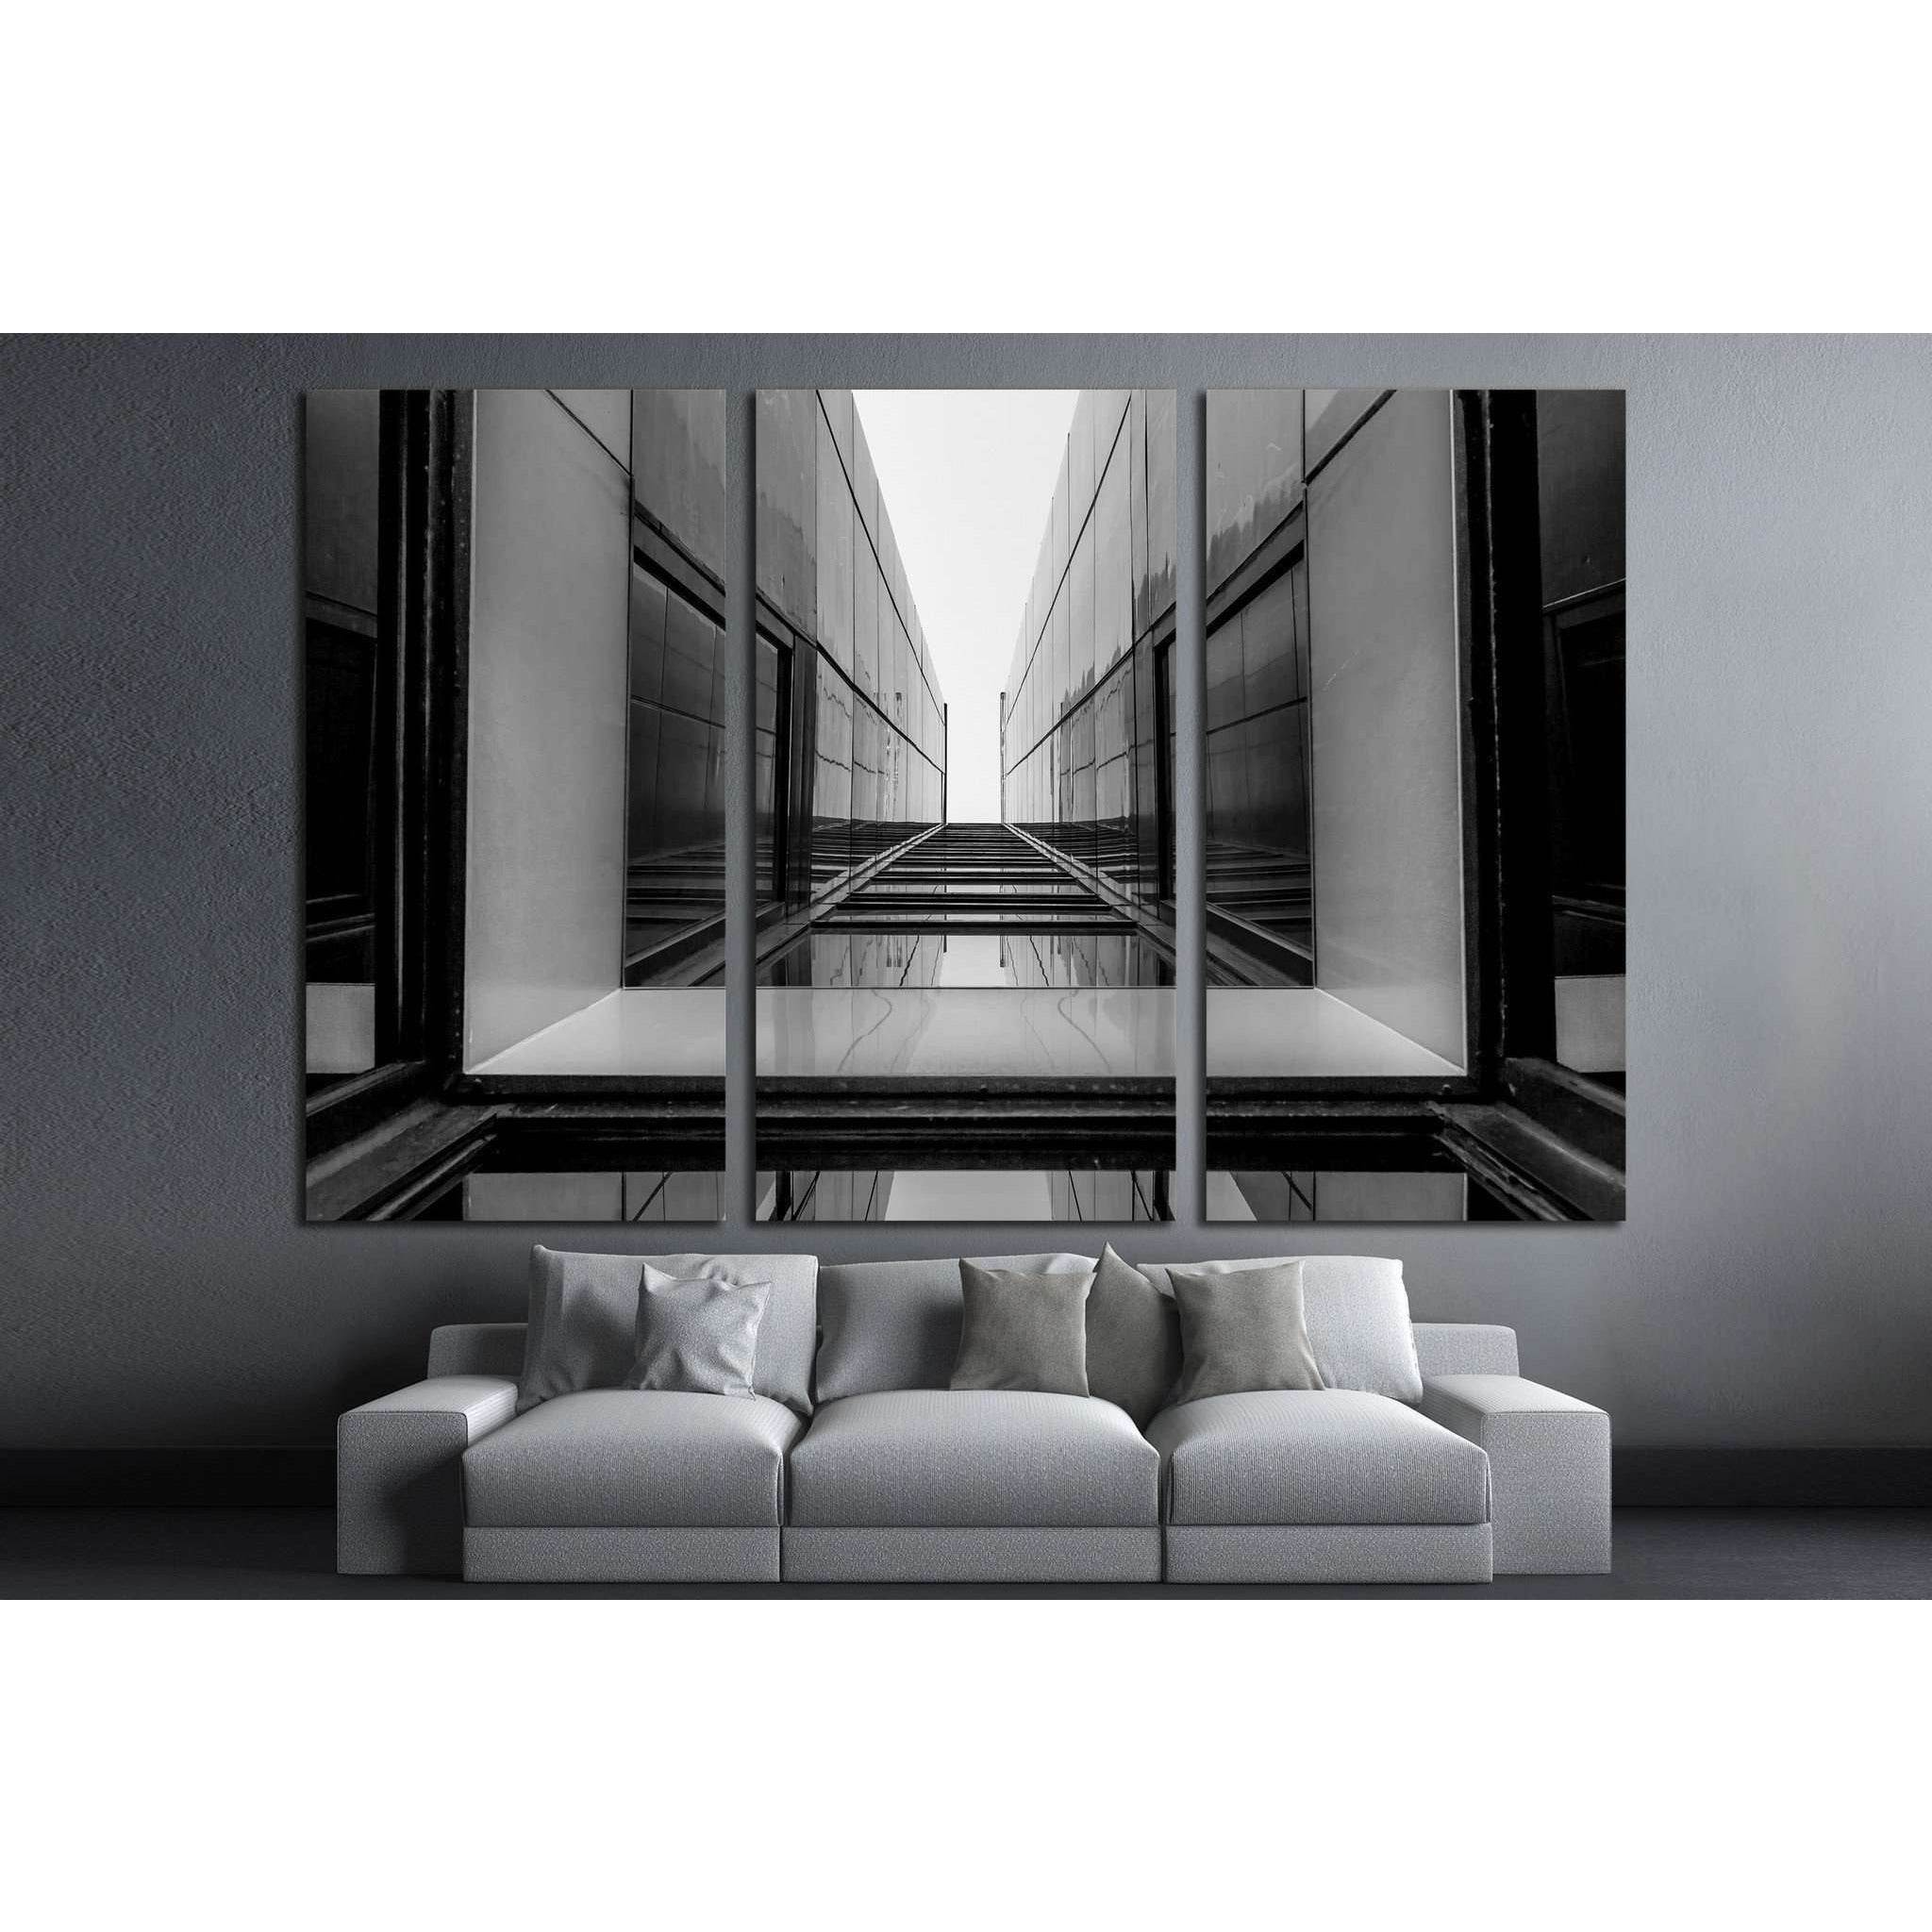 Urban Geometry, glass building, Black and white №1597 Ready to Hang Canvas Print